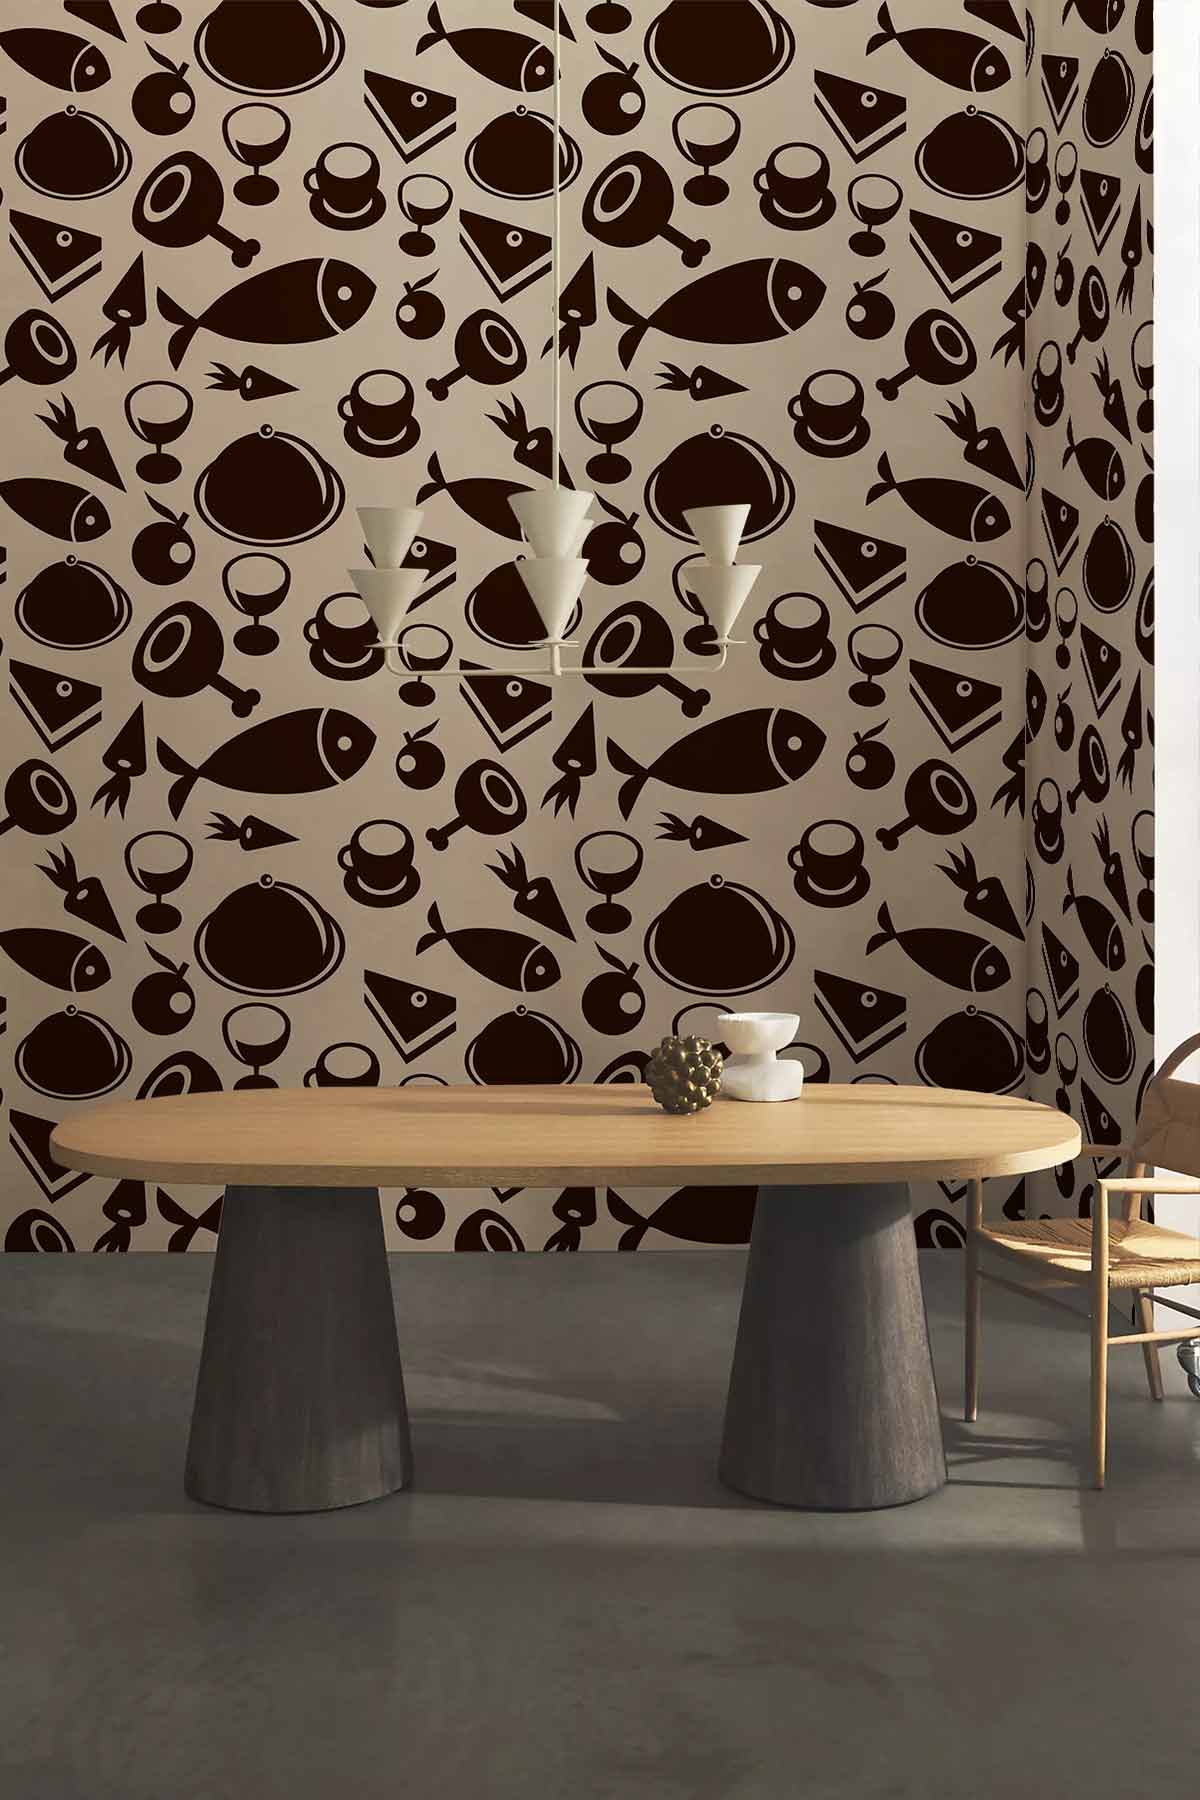 Food Dishes Wallpaper Mural